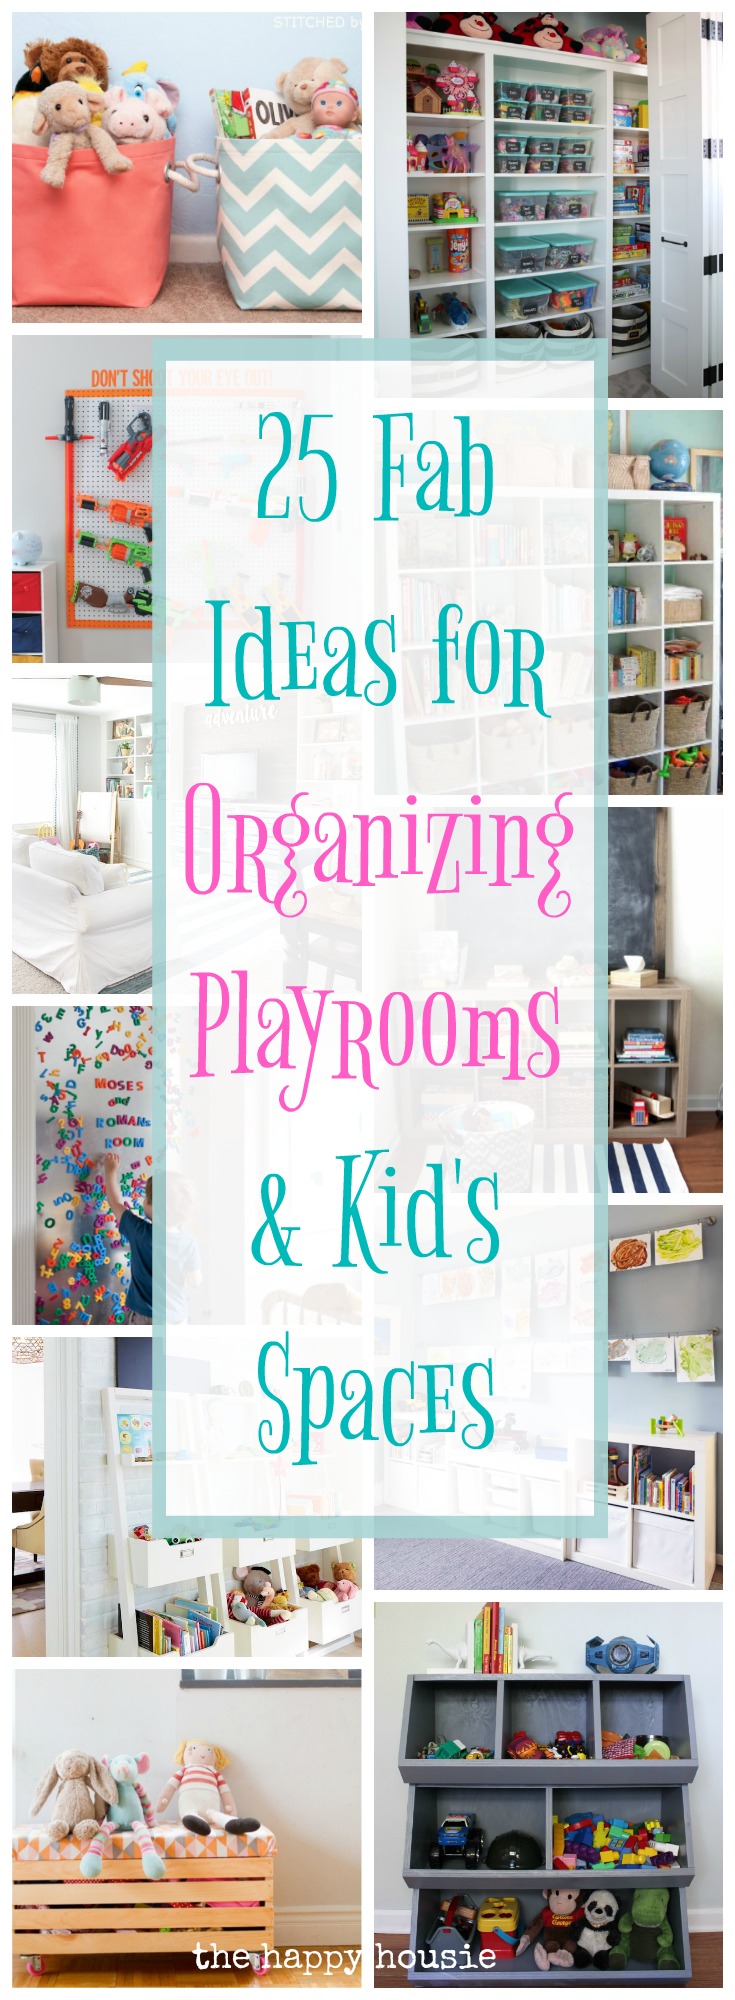 25 Fab Ideas For Organizing Playrooms & Kid's Spaces graphic.